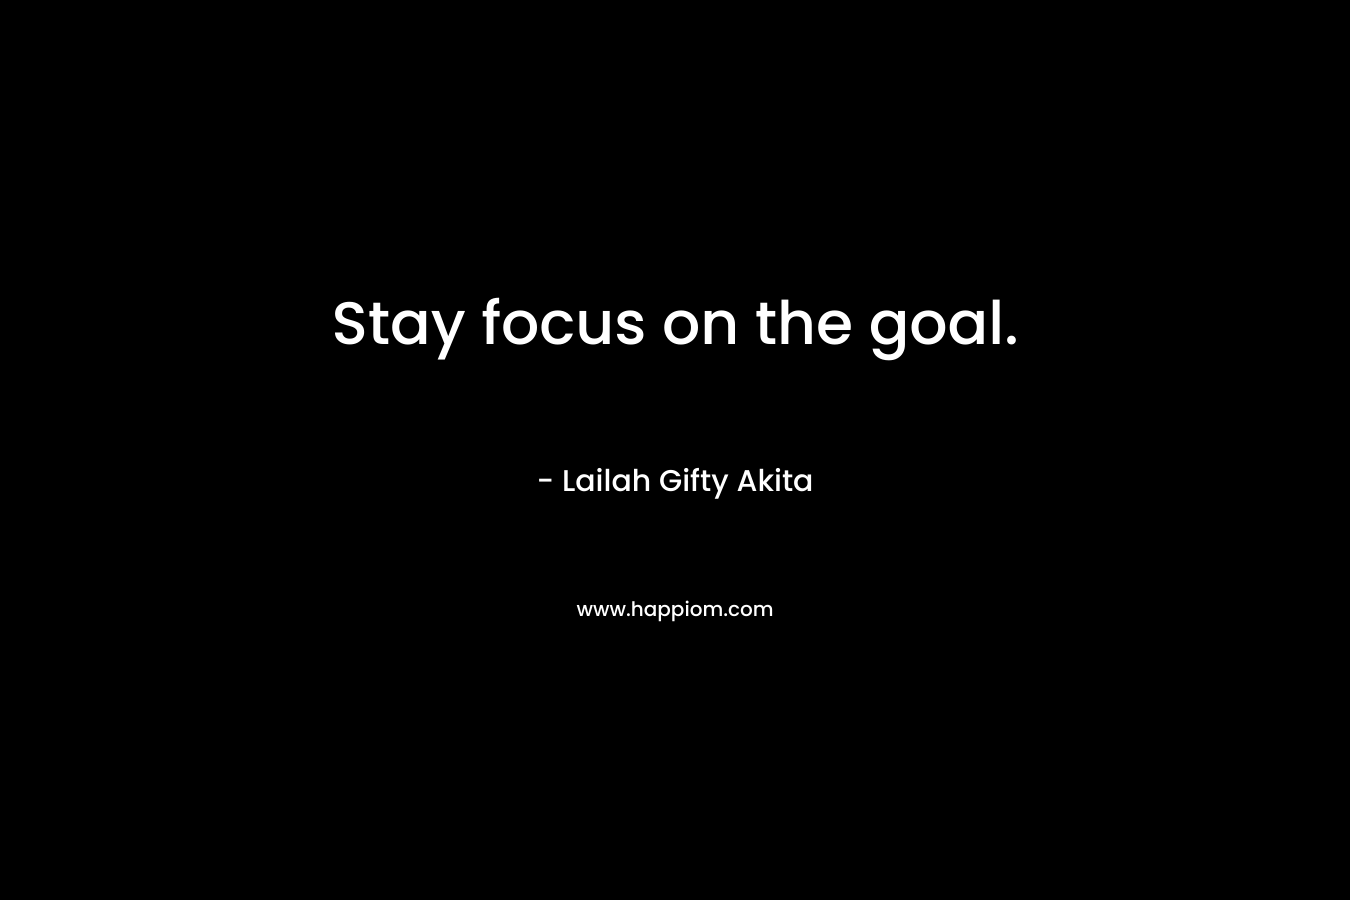 Stay focus on the goal.